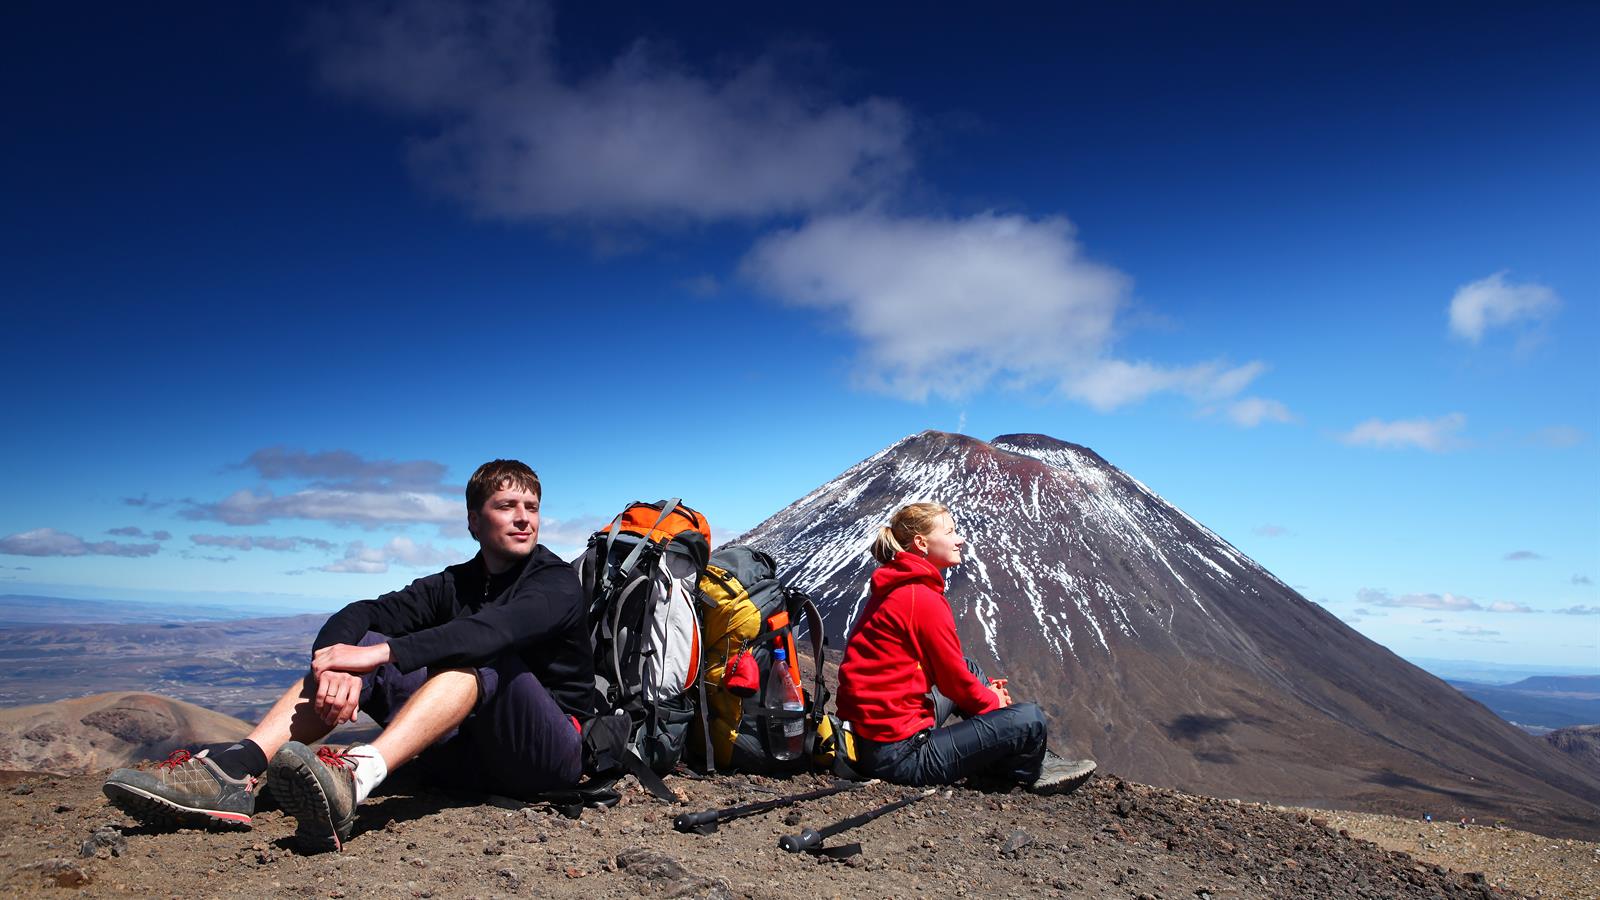 Taking time to admire the view on the Tongariro Alpine Crossing. Pic courtesy tongarirocrossing.org.nz